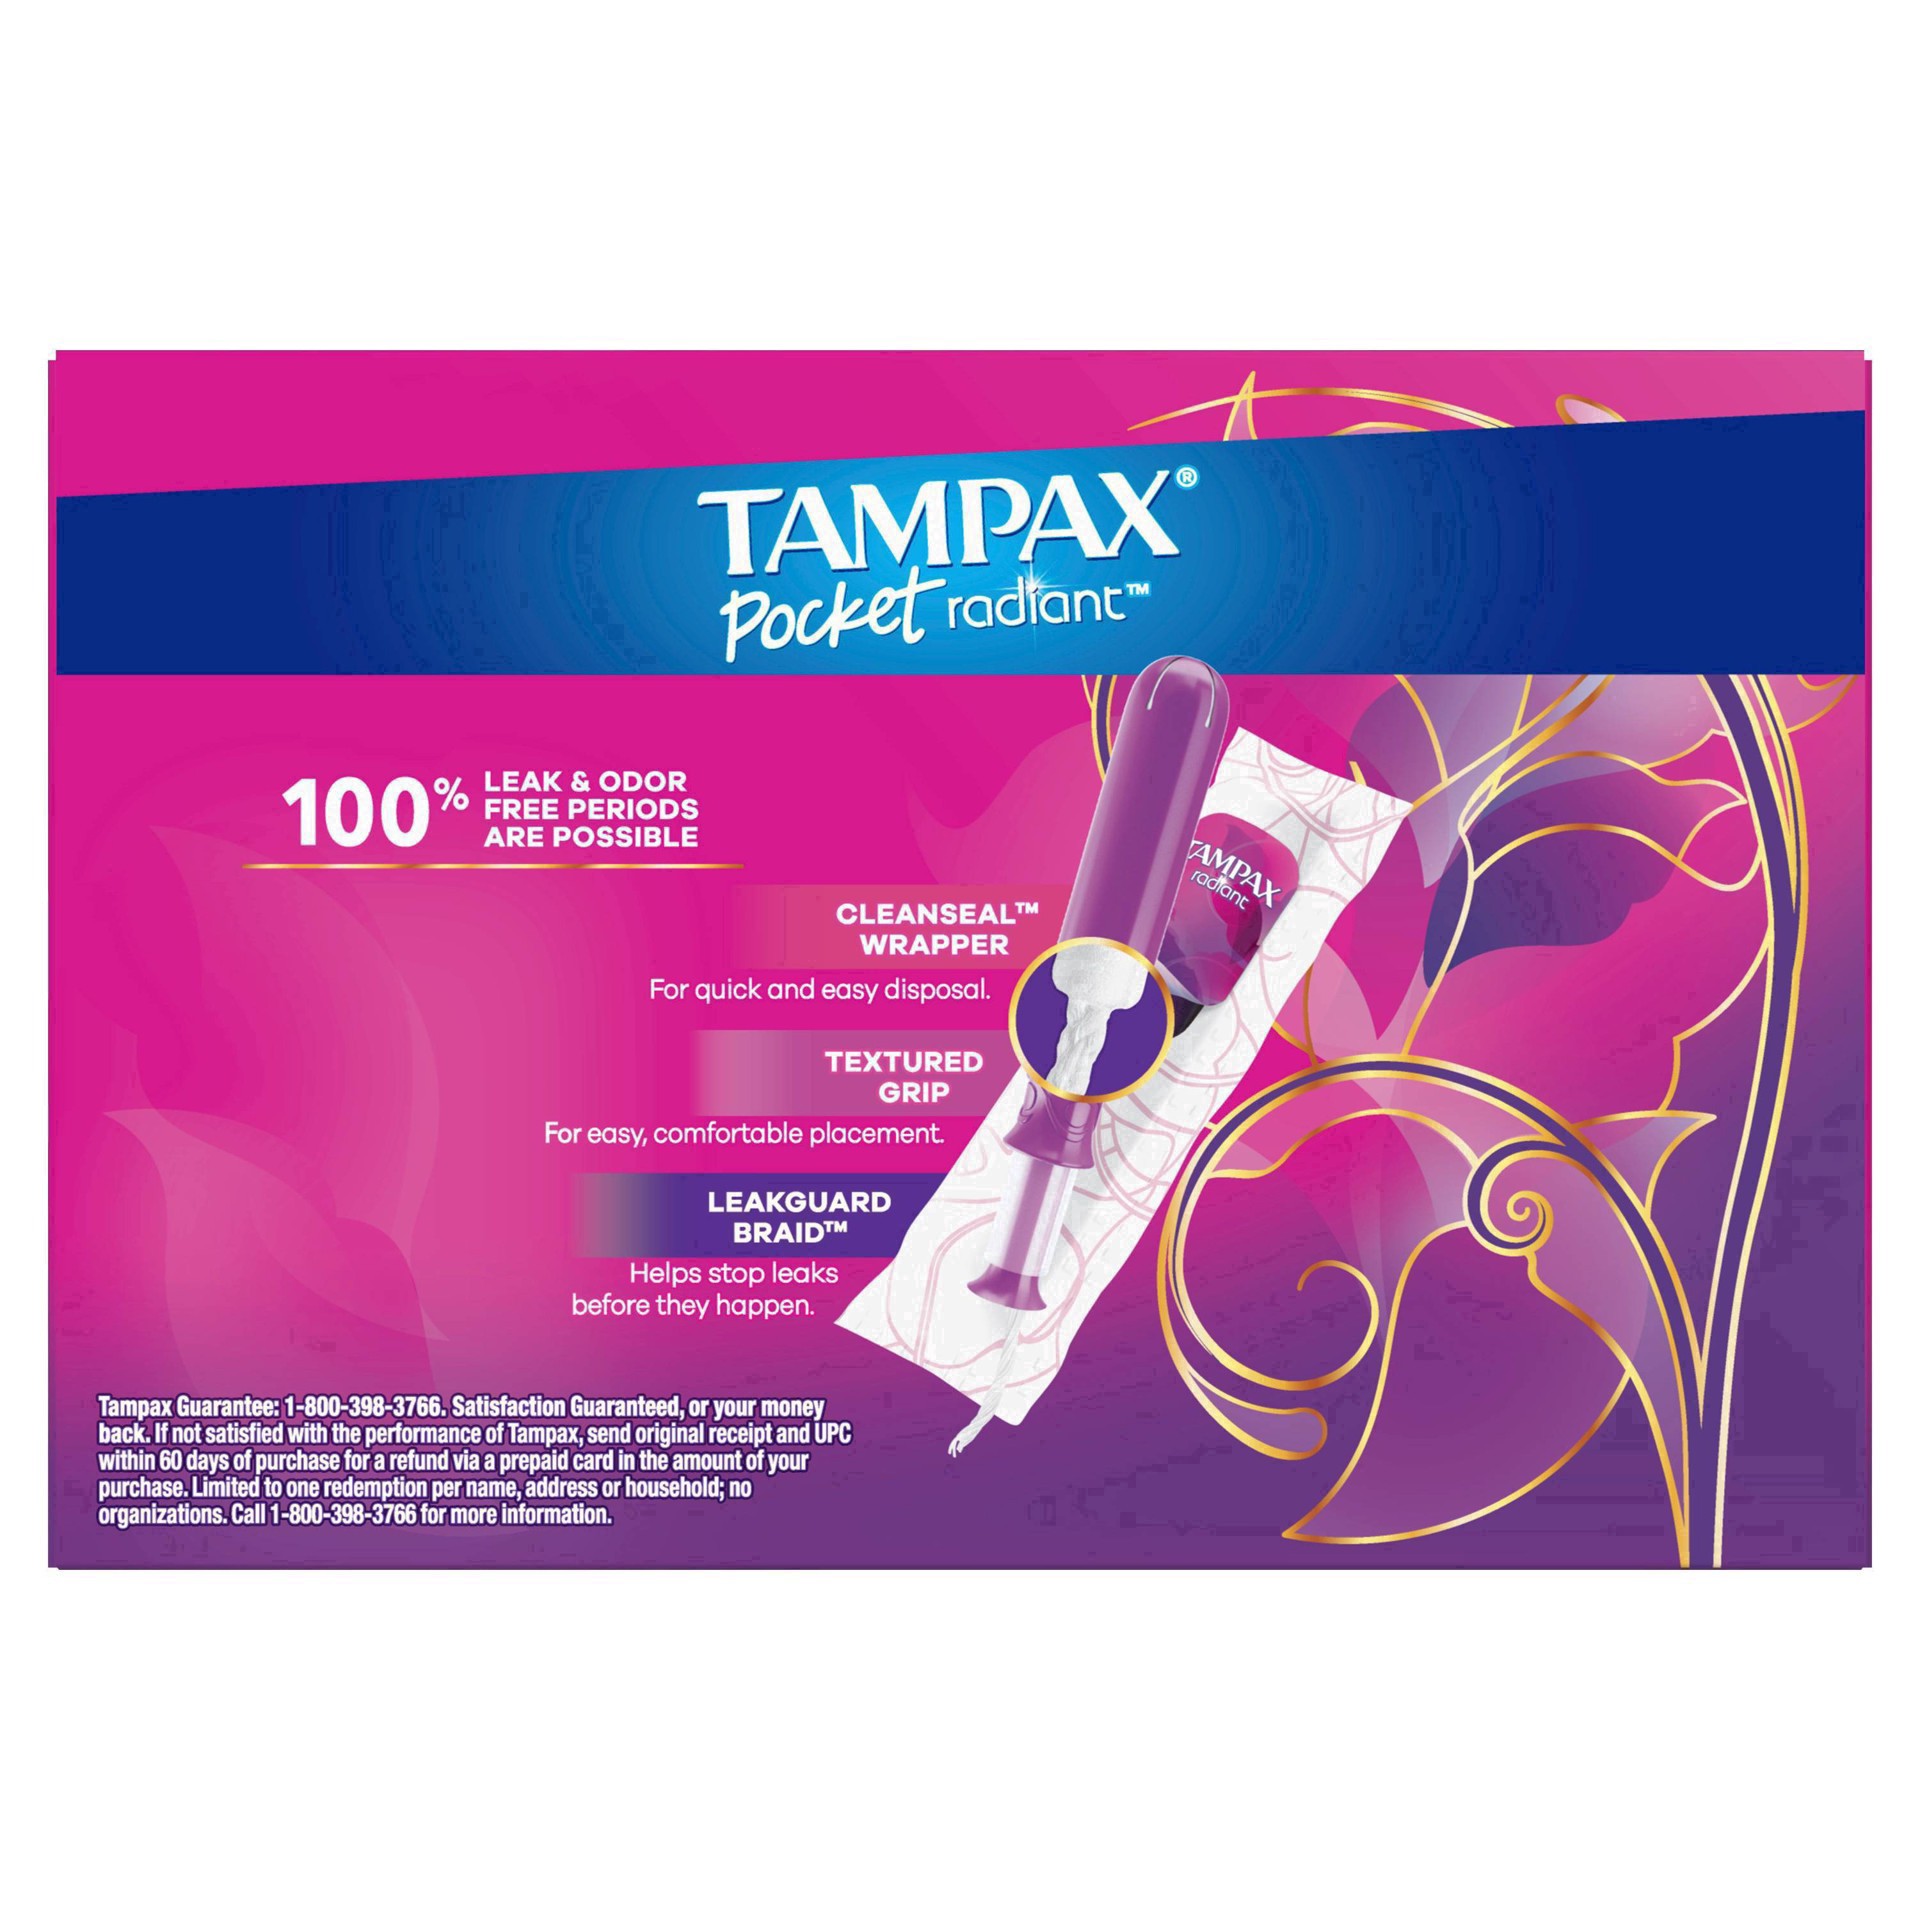 slide 66 of 94, Tampax Pocket Radiant Compact Plastic Tampons, With LeakGuard Braid, Super Absorbency, Unscented, 28 Count, 28 ct